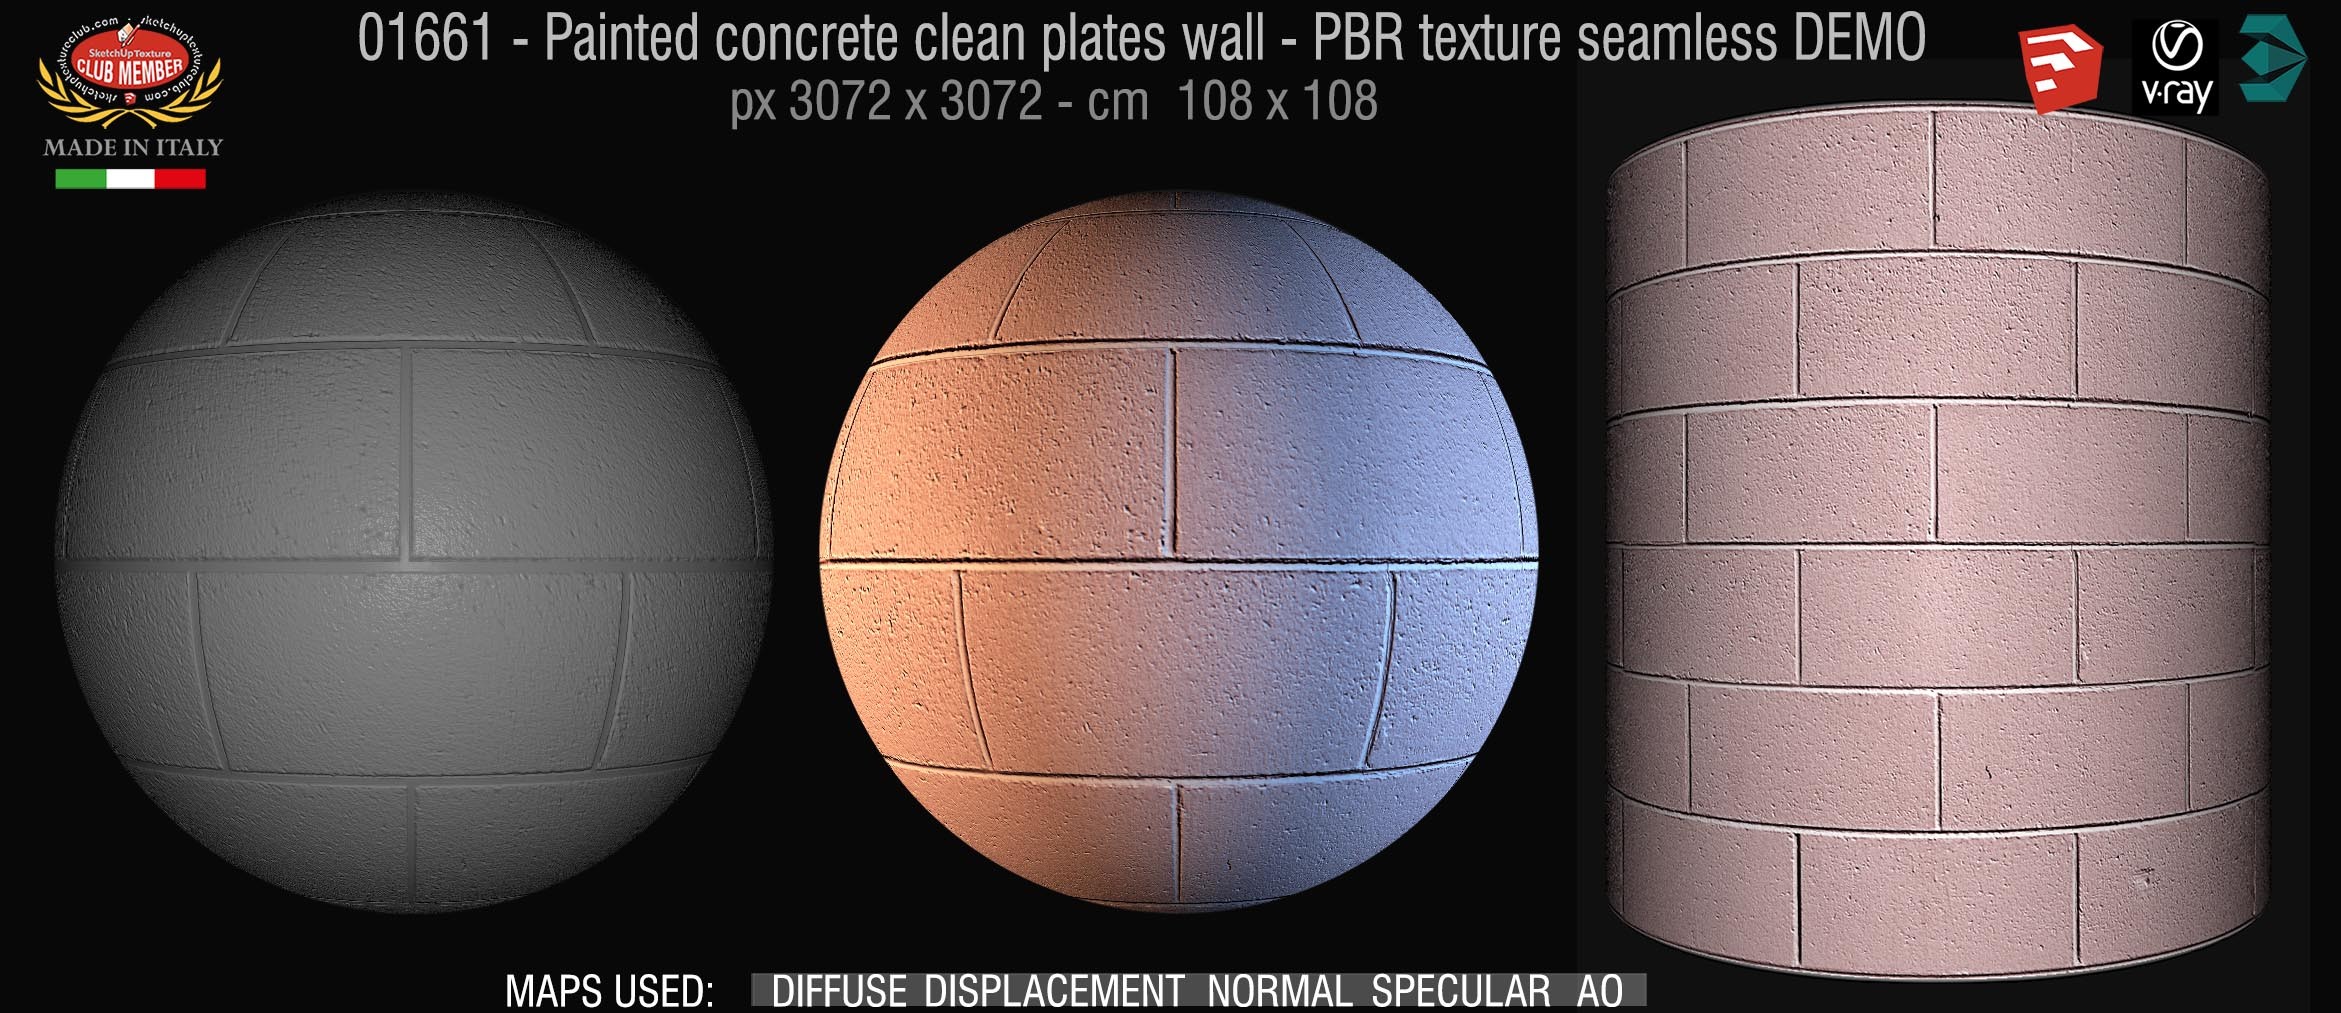 01661 Painted concrete clean plates wall PBR texture seamless DEMO